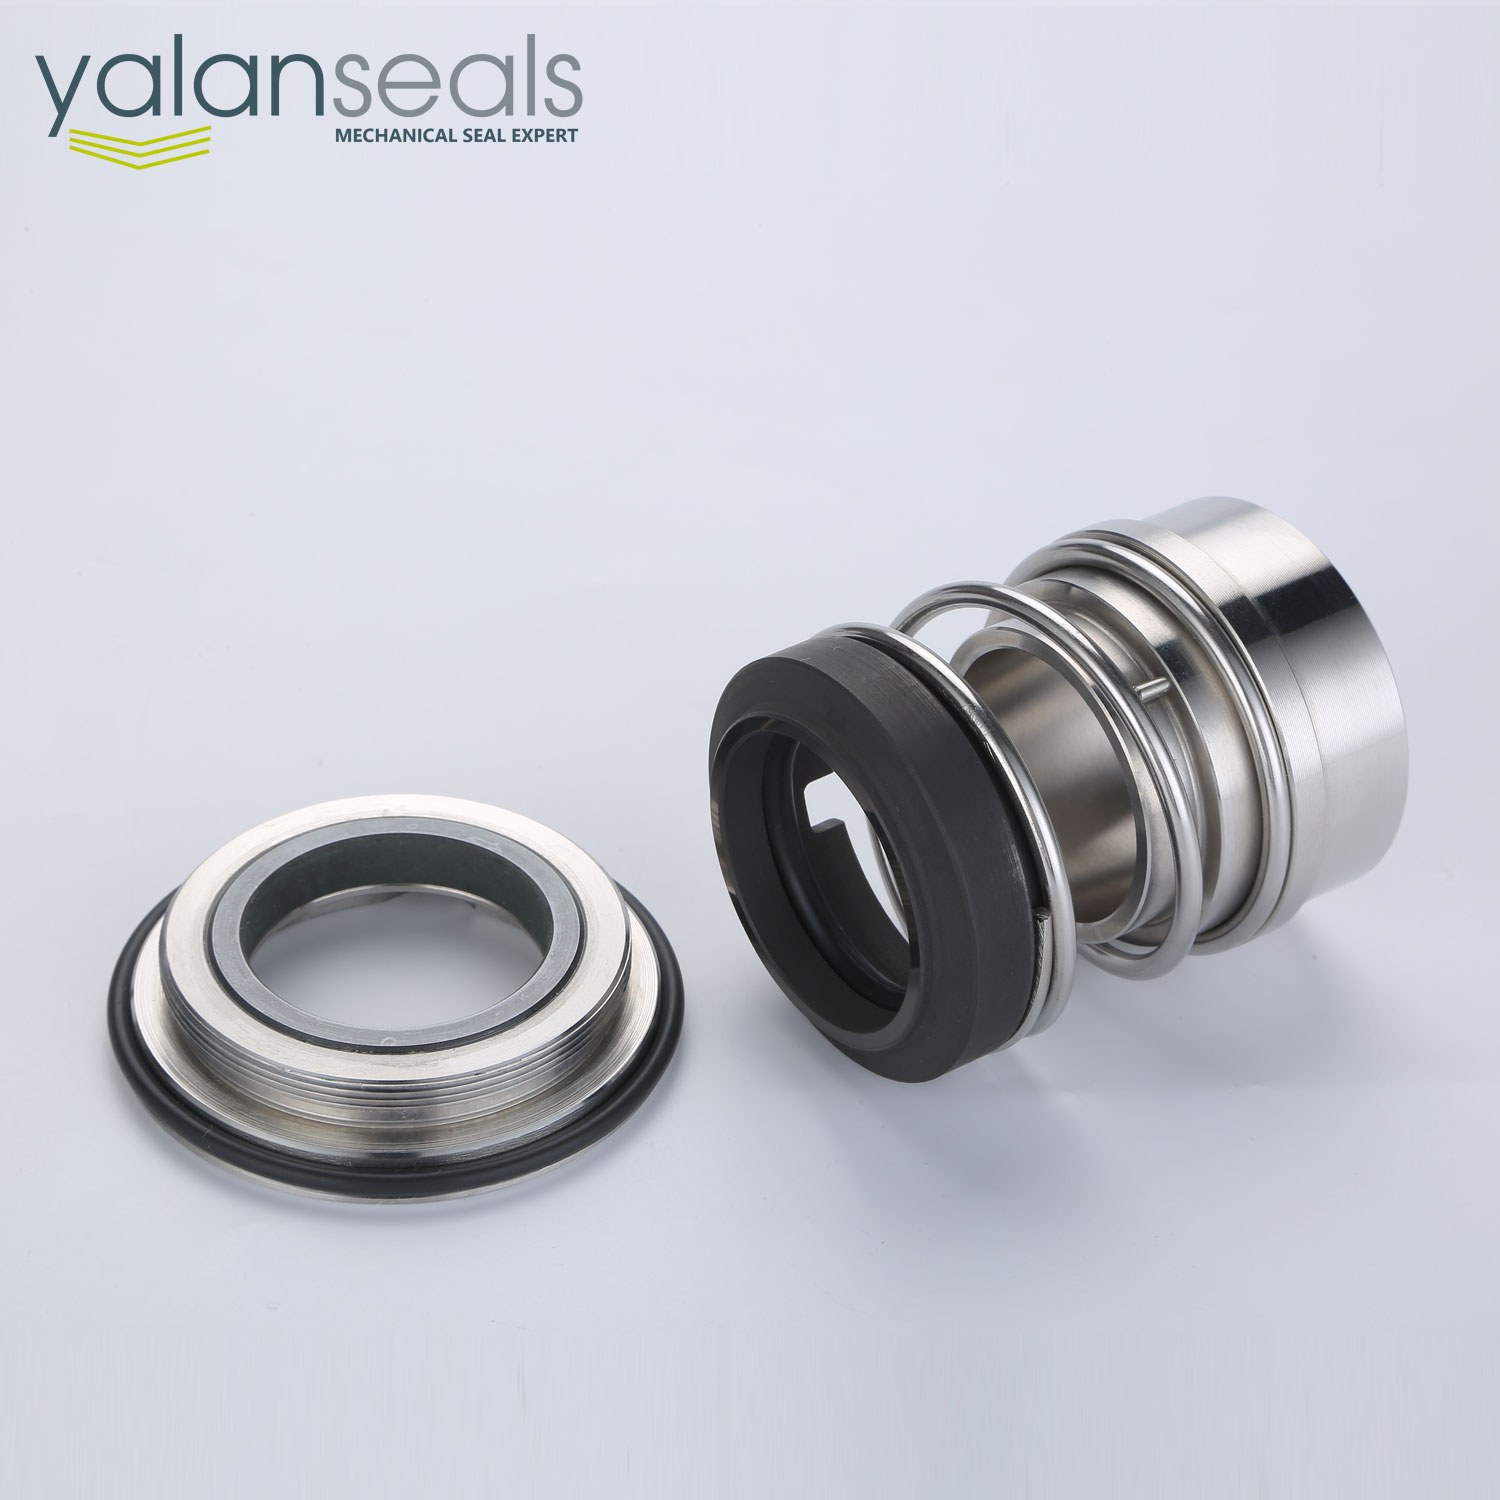 LKH Mechanical Seal for Alfa-Laval LKH Centrifugal Pumps